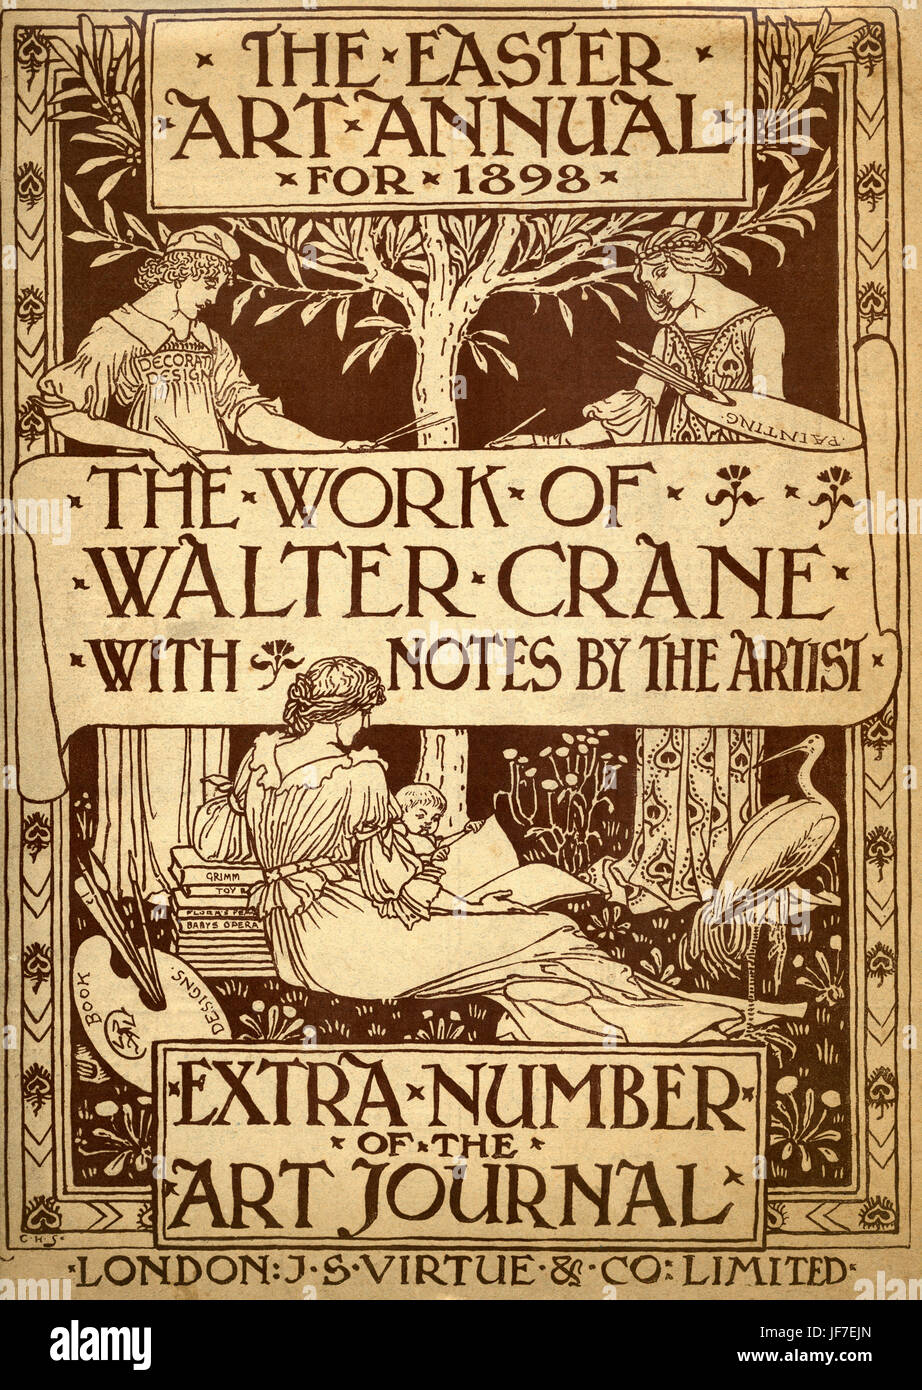 Walter Crane - cover of The Work of Walter Crane.  Published 1898 in The Easter Art Annual. London, J S Virtue. English artist of Arts and Crafts movement, 15 August  1845 - 14 March   1915. Portrait by George Frederic Watts: 23 February 1817 – 1 July 1904. Stock Photo